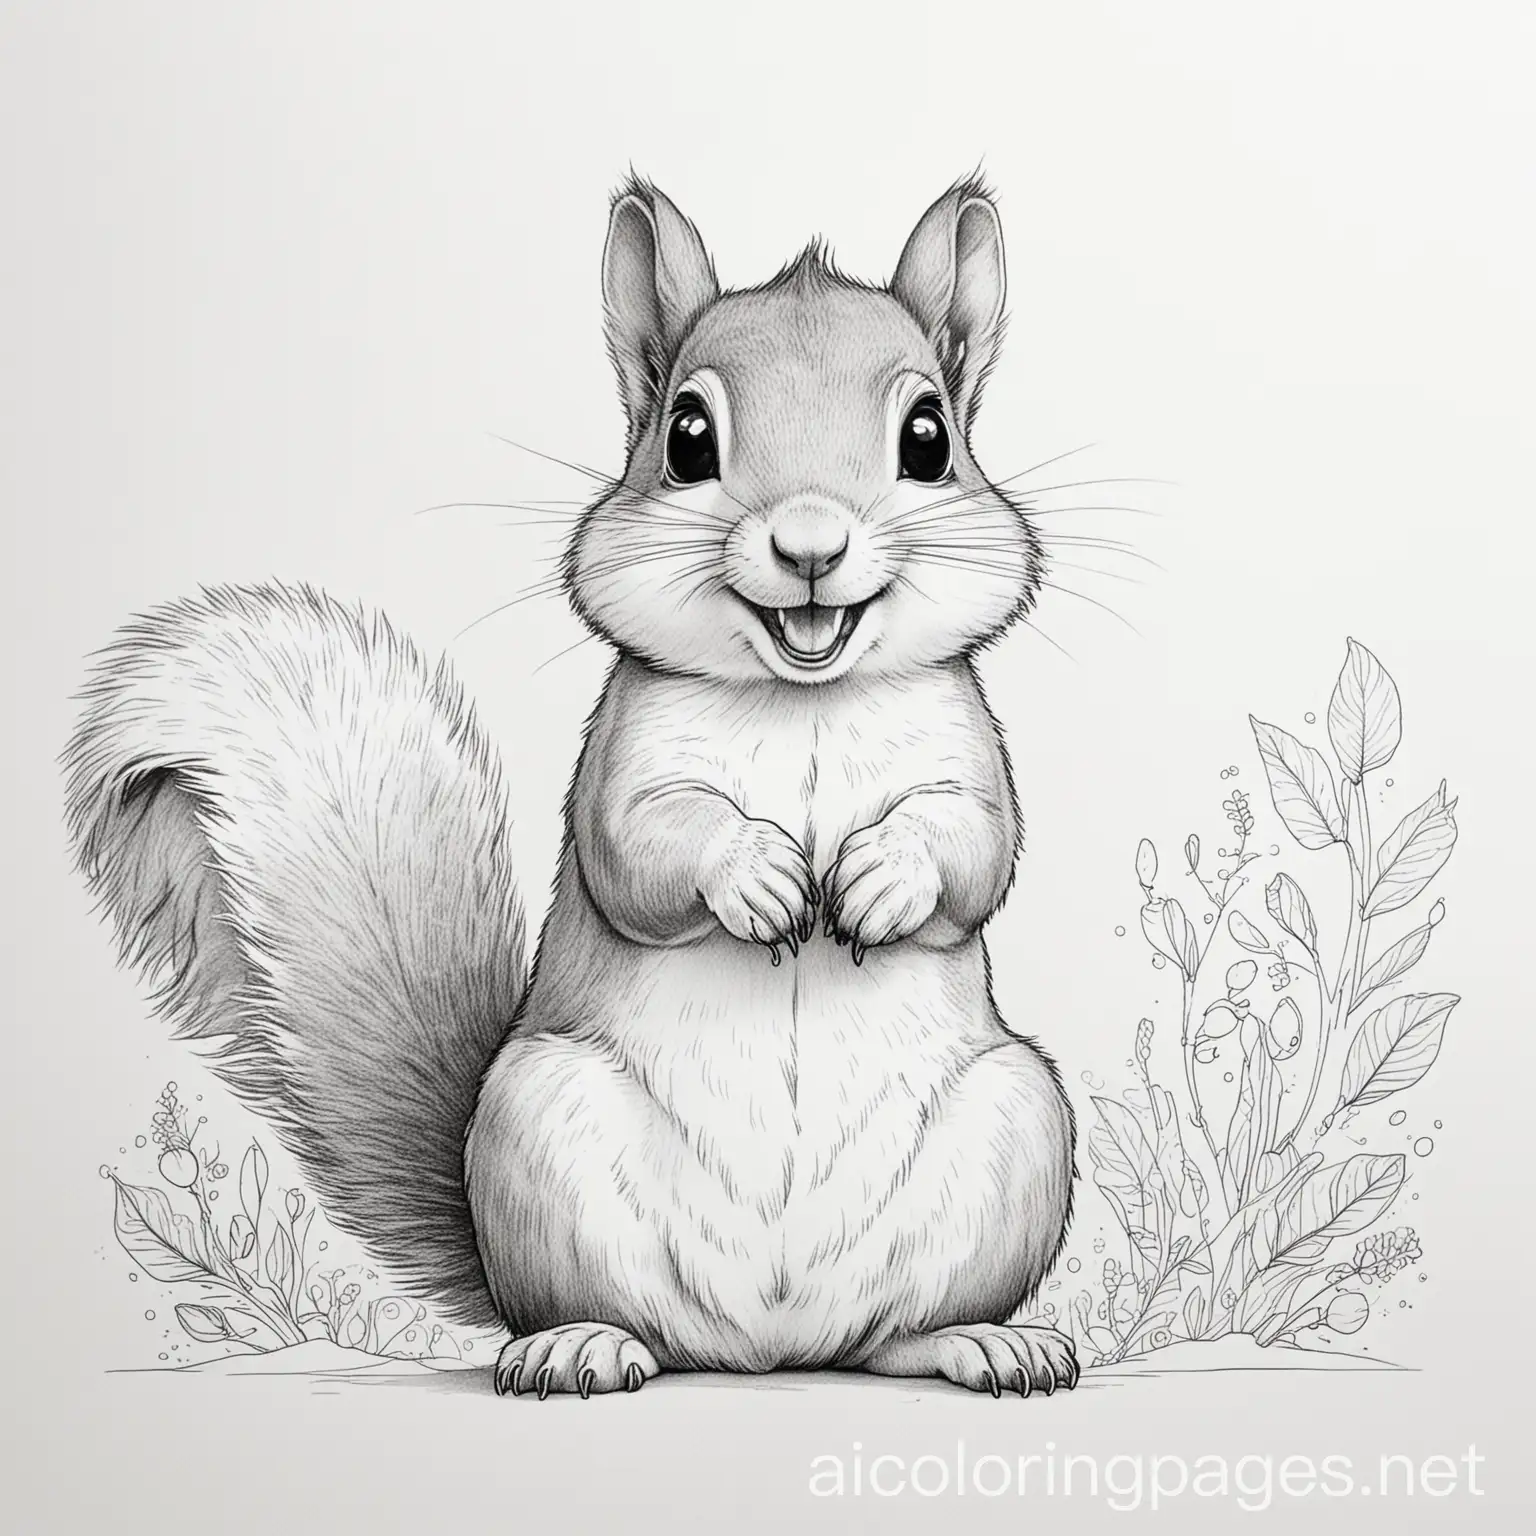 happy squirel, Coloring Page, black and white, line art, white background, Simplicity, Ample White Space. The background of the coloring page is plain white to make it easy for young children to color within the lines. The outlines of all the subjects are easy to distinguish, making it simple for kids to color without too much difficulty